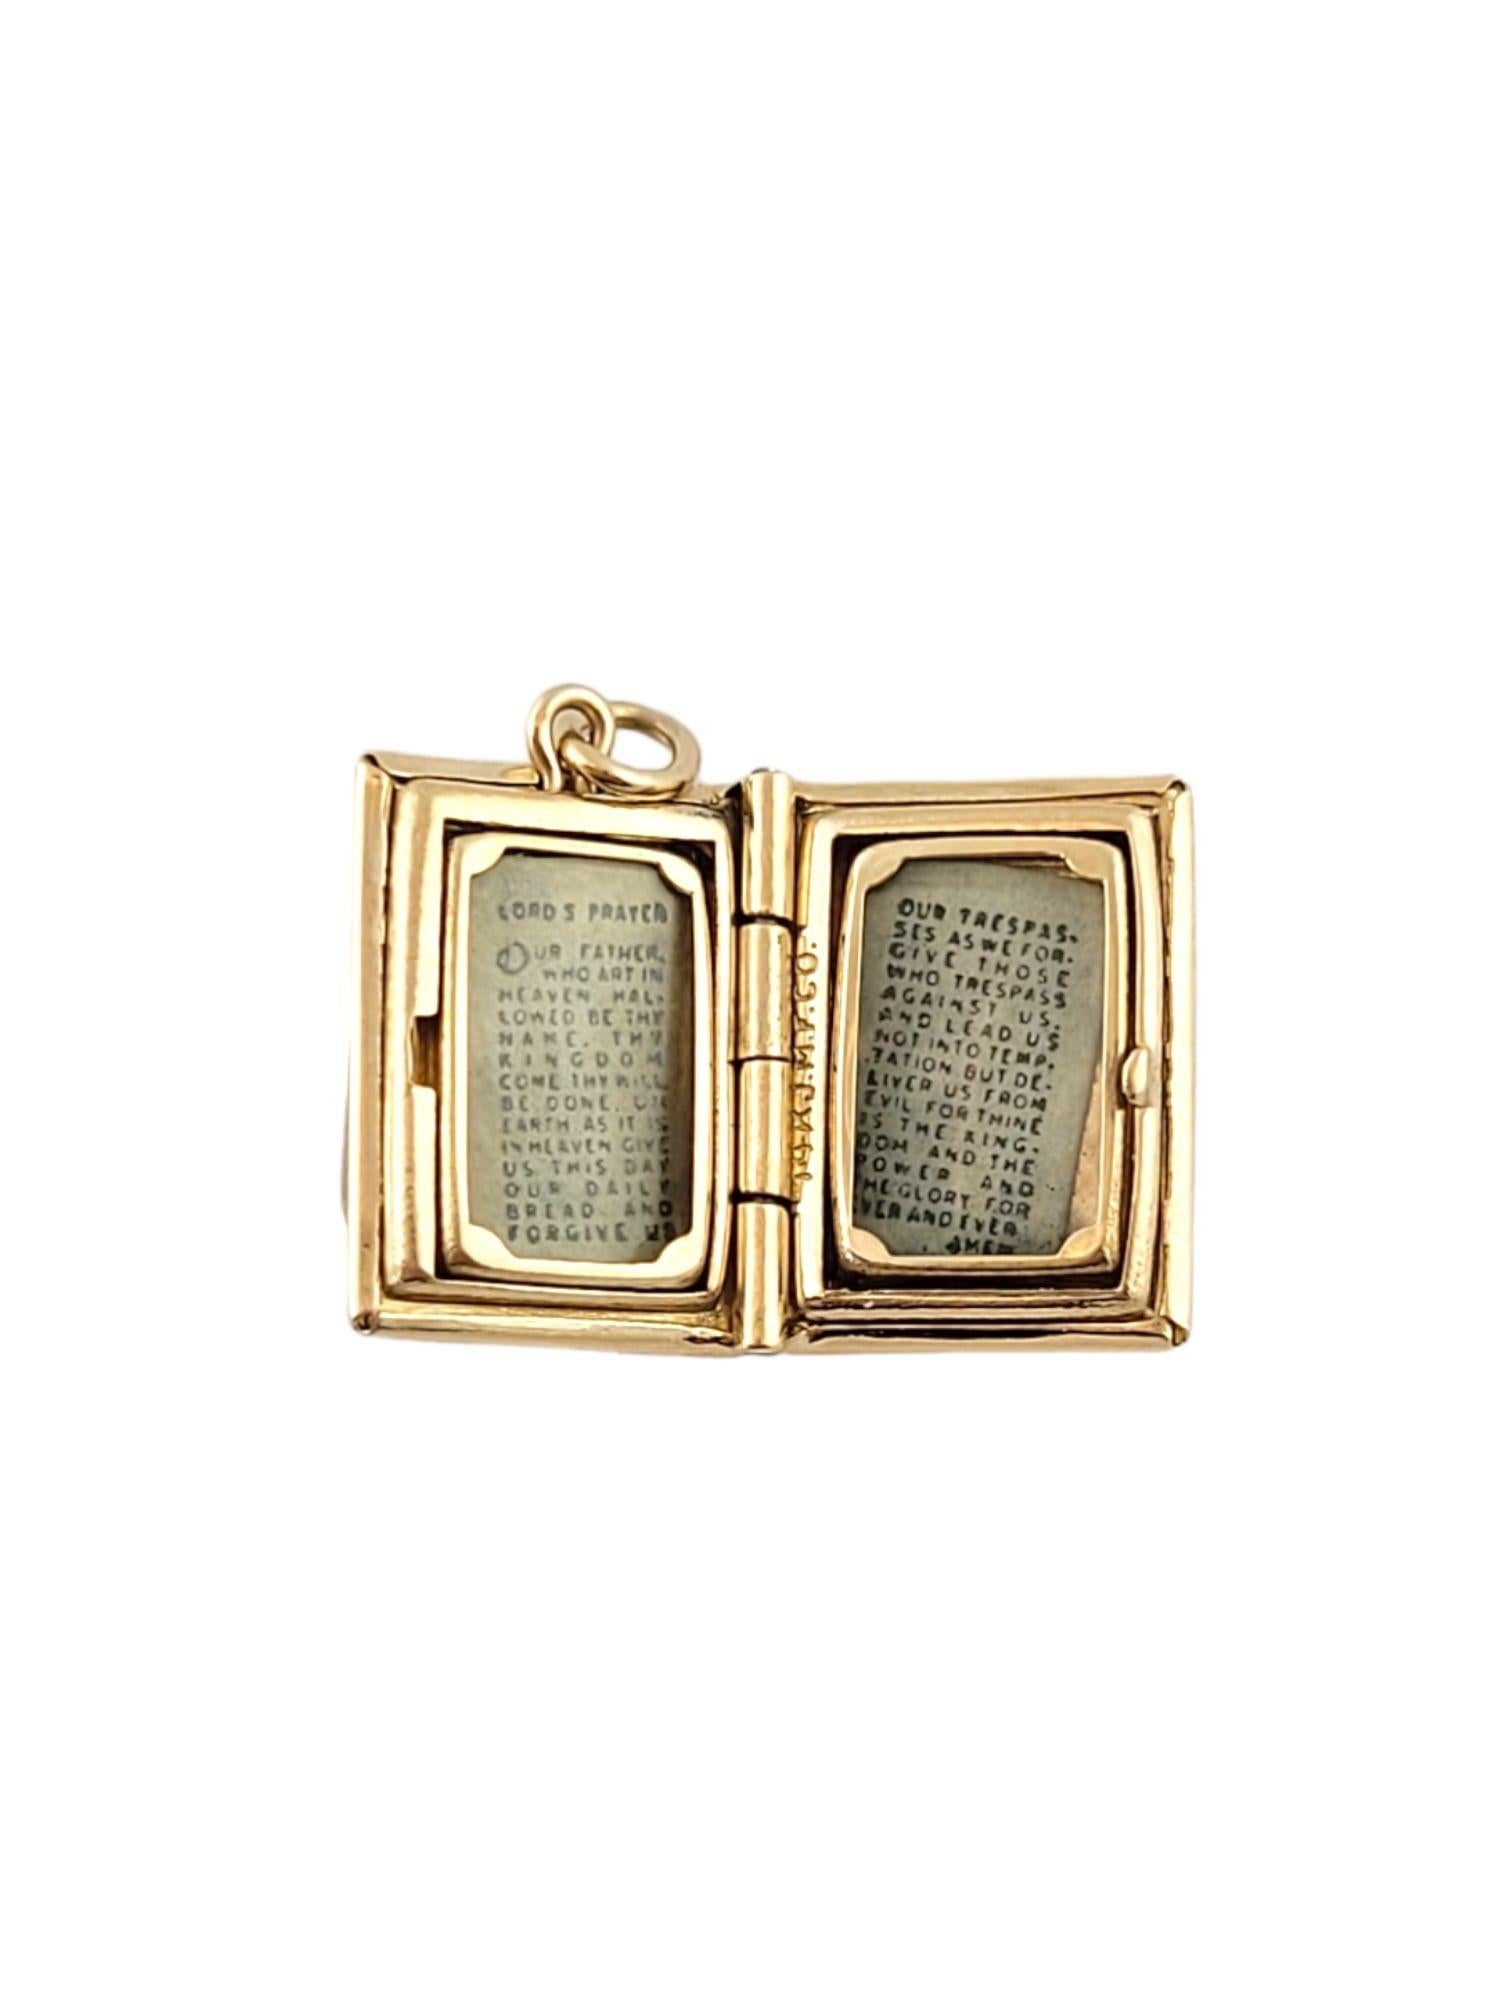 Vintage 14K Yellow Gold Bible Charm Locket

This beautiful 14K gold locket has a mother of pearl inlay with a gold cross on the front!

Size: 16mm X 11mm X 6mm
Length w/ bail: 19.5mm

Weight: 2.7 g/ 1.7 dwt

Hallmark: 14K JMF

Very good condition,